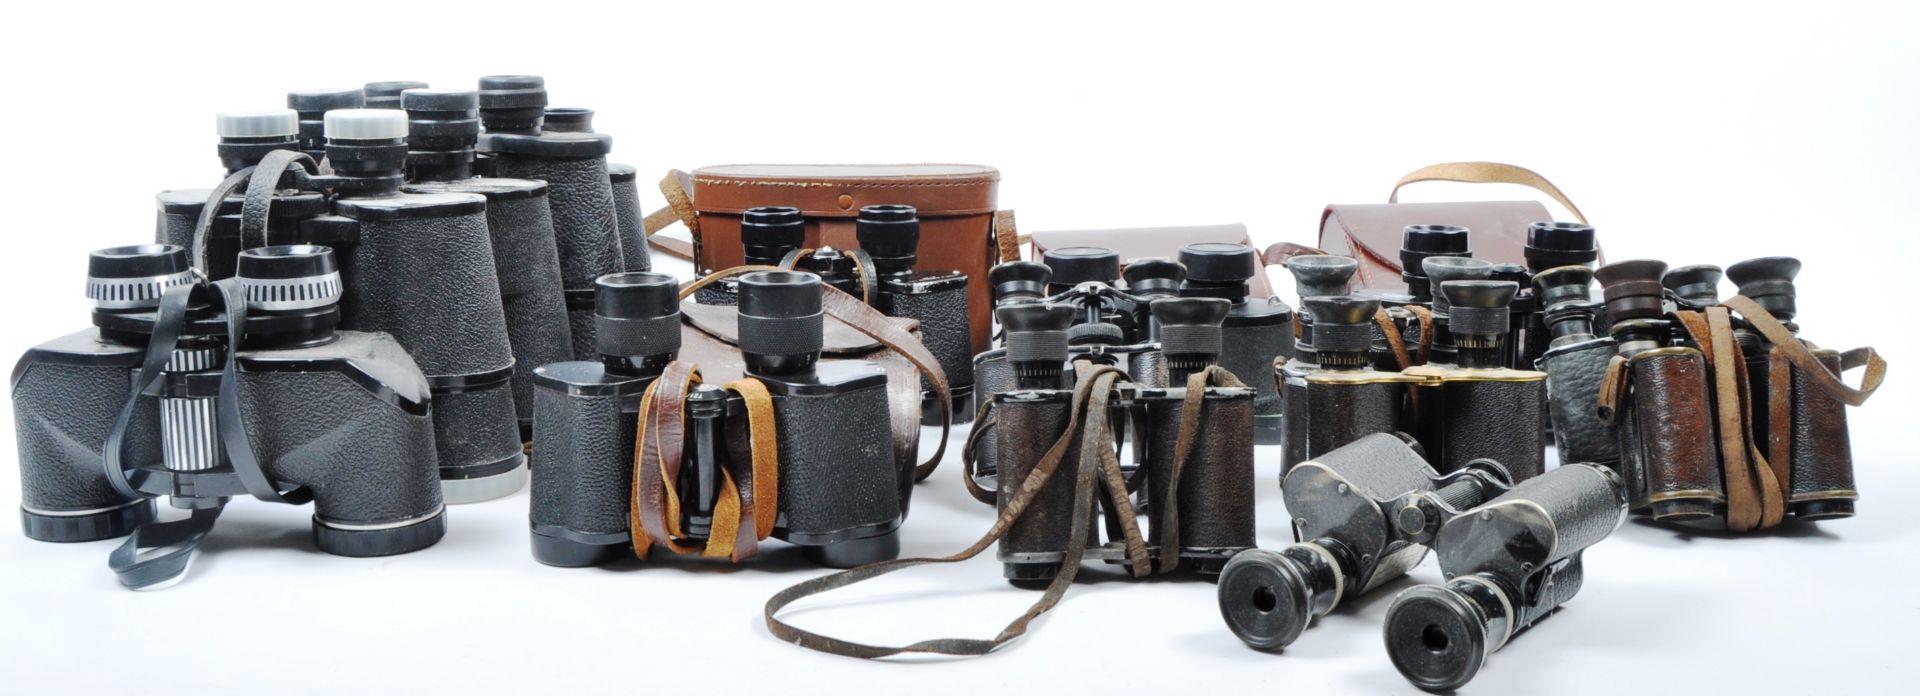 MIXED COLLECTION OF VINTAGE BINOCULARS - Image 2 of 6